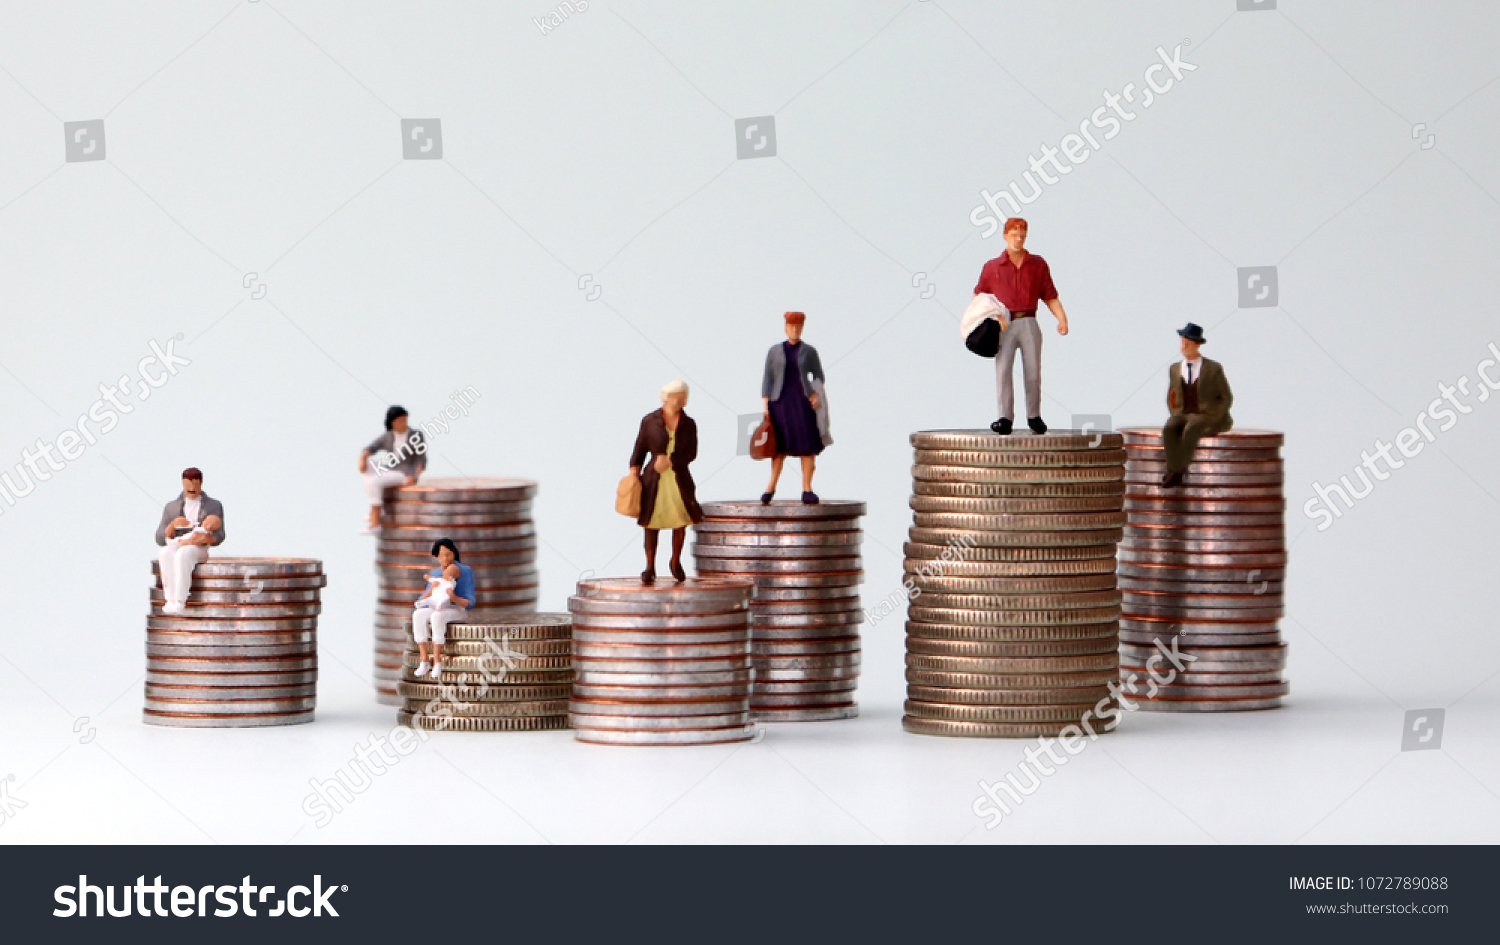 Miniature people standing on piles of different heights of coins. Income and economic inequality concept. #1072789088